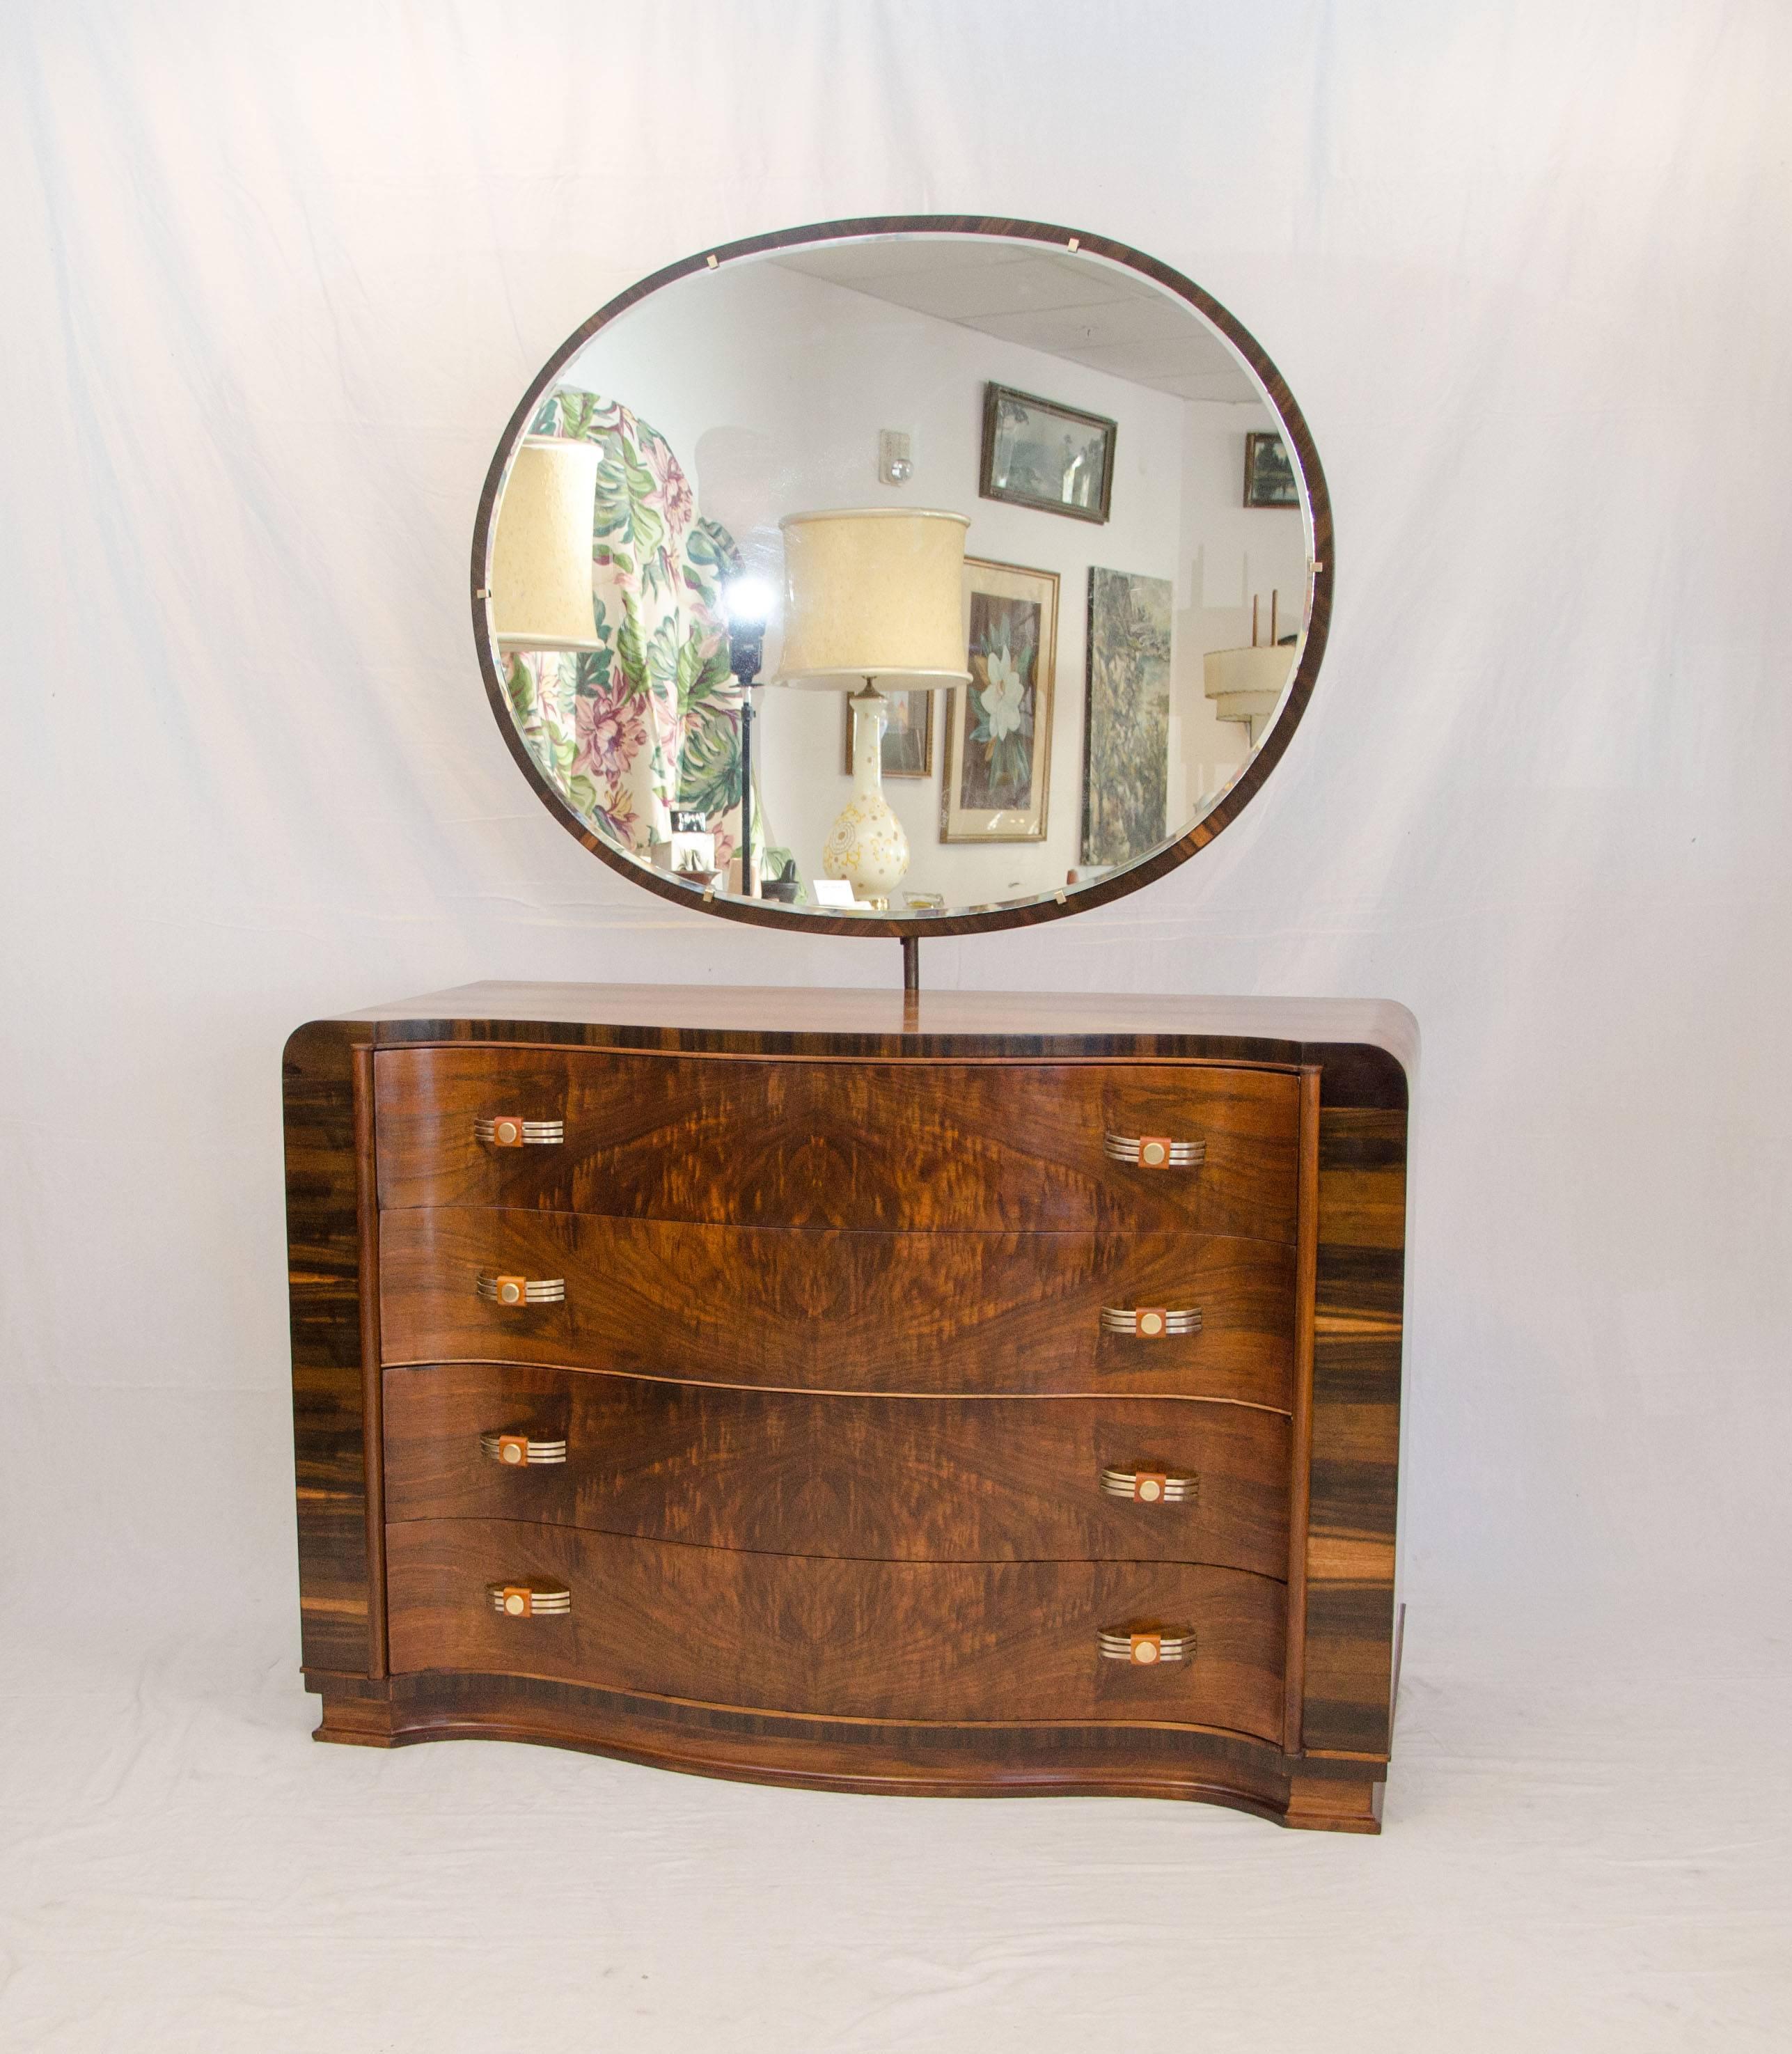 Curvaceous walnut Art Deco dresser with mirror, the drawer are serpentine and book-matched burl walnut grain patterns. The dresser sides also display beautiful grain patterns. The original drawer pulls are brass with Bakelite accents. The mirror is